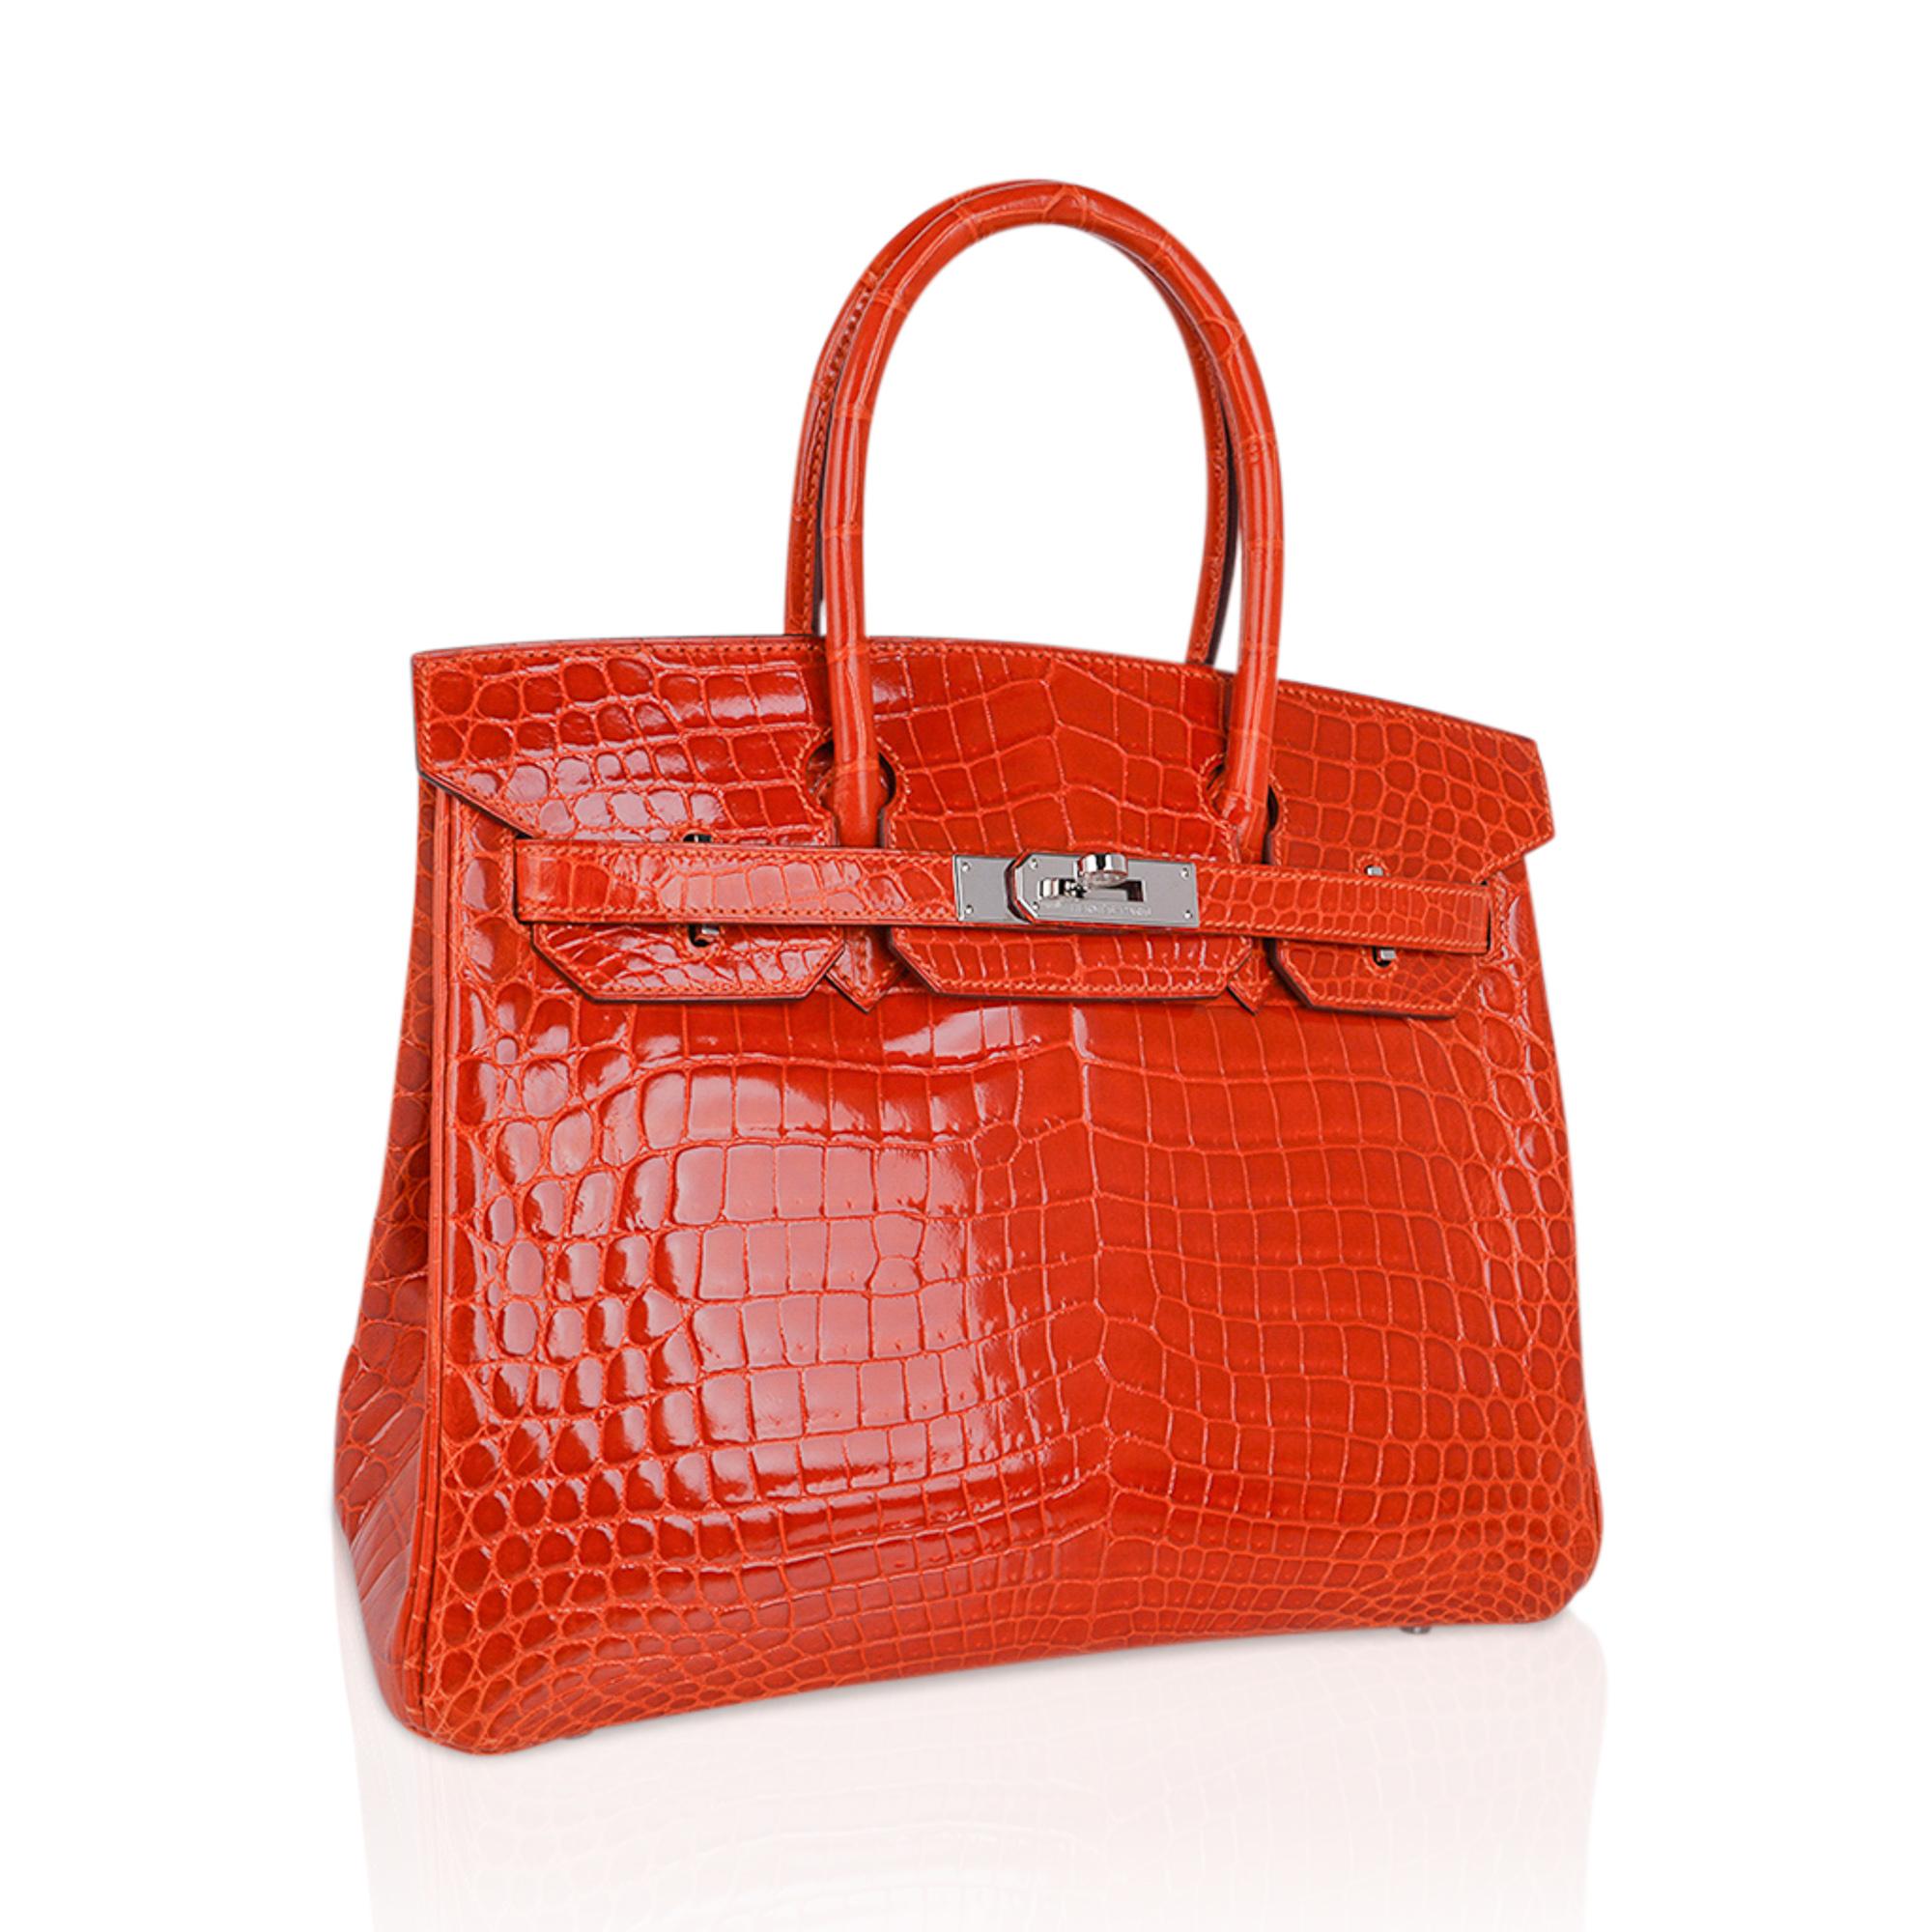 Mightychic offers a Niloticus Crocodile Hermes Birkin 30 bag featured in Orange.
Fresh palladium hardware accentuates this gorgeous orange crocodile Hermes bag. 
Carried 1 time only. Immaculate condition interior and exterior.
This exotic Niloticus